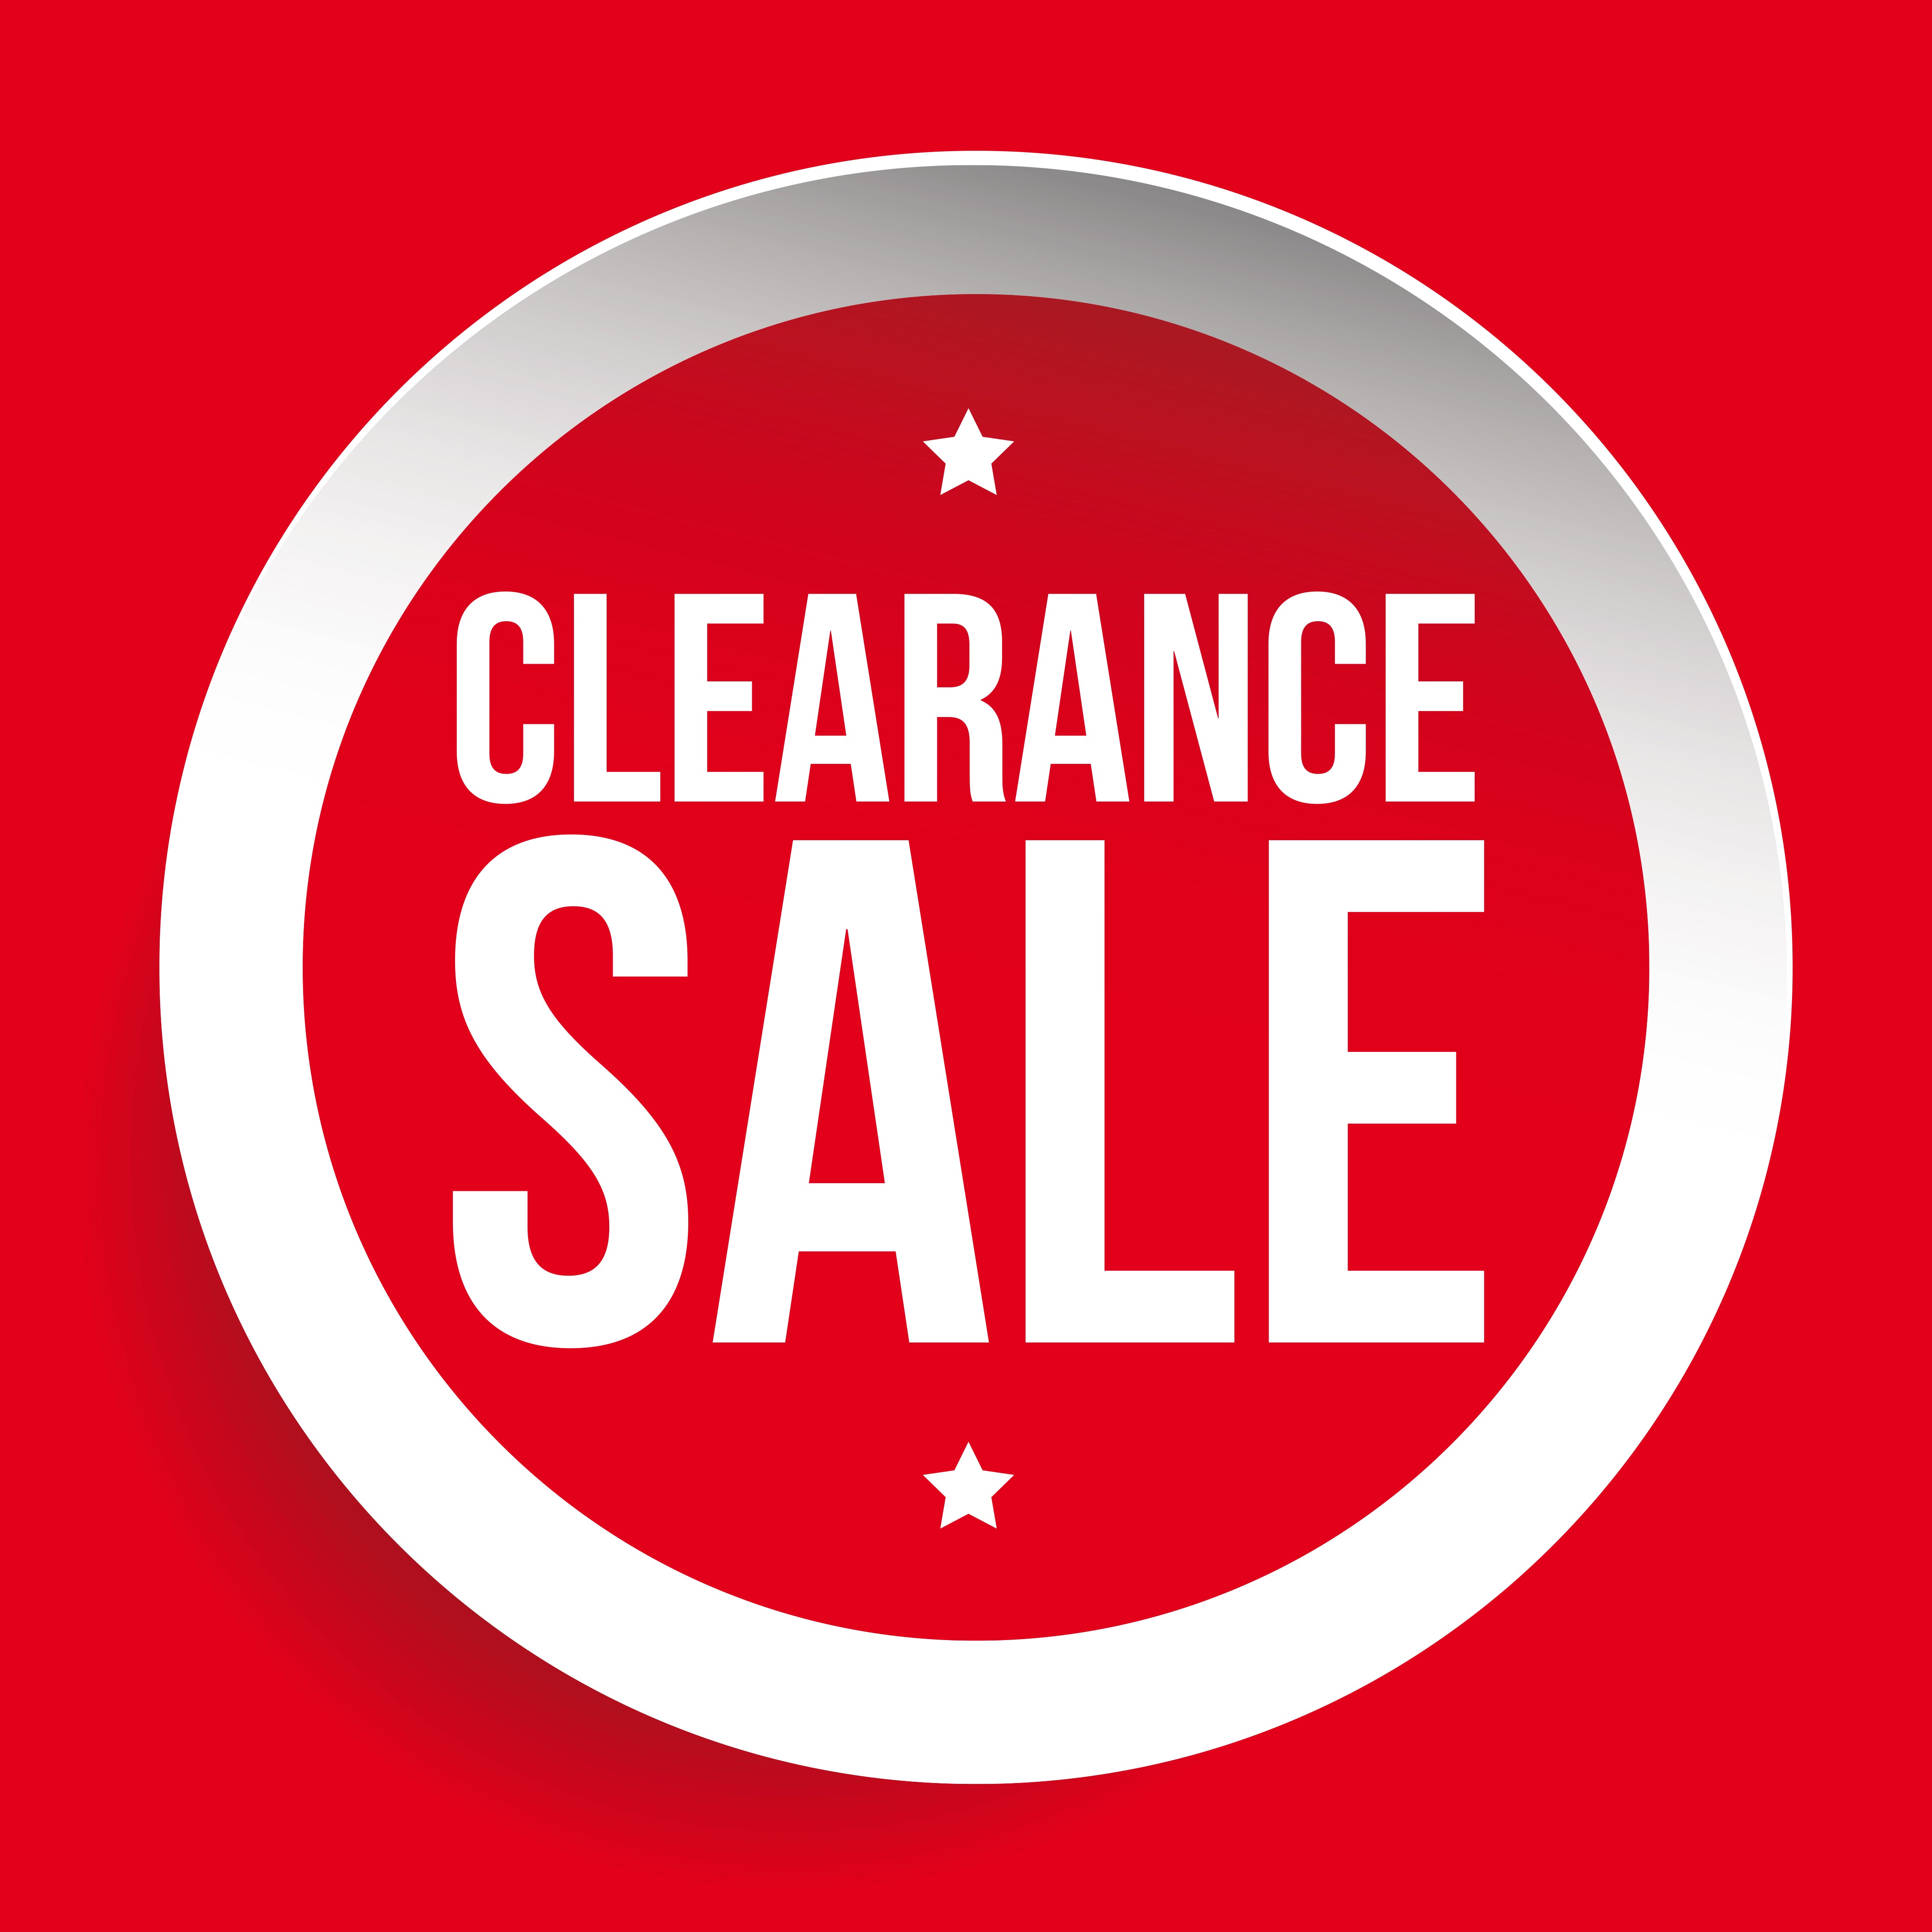 CLEARANCE SALE – smartpackaging